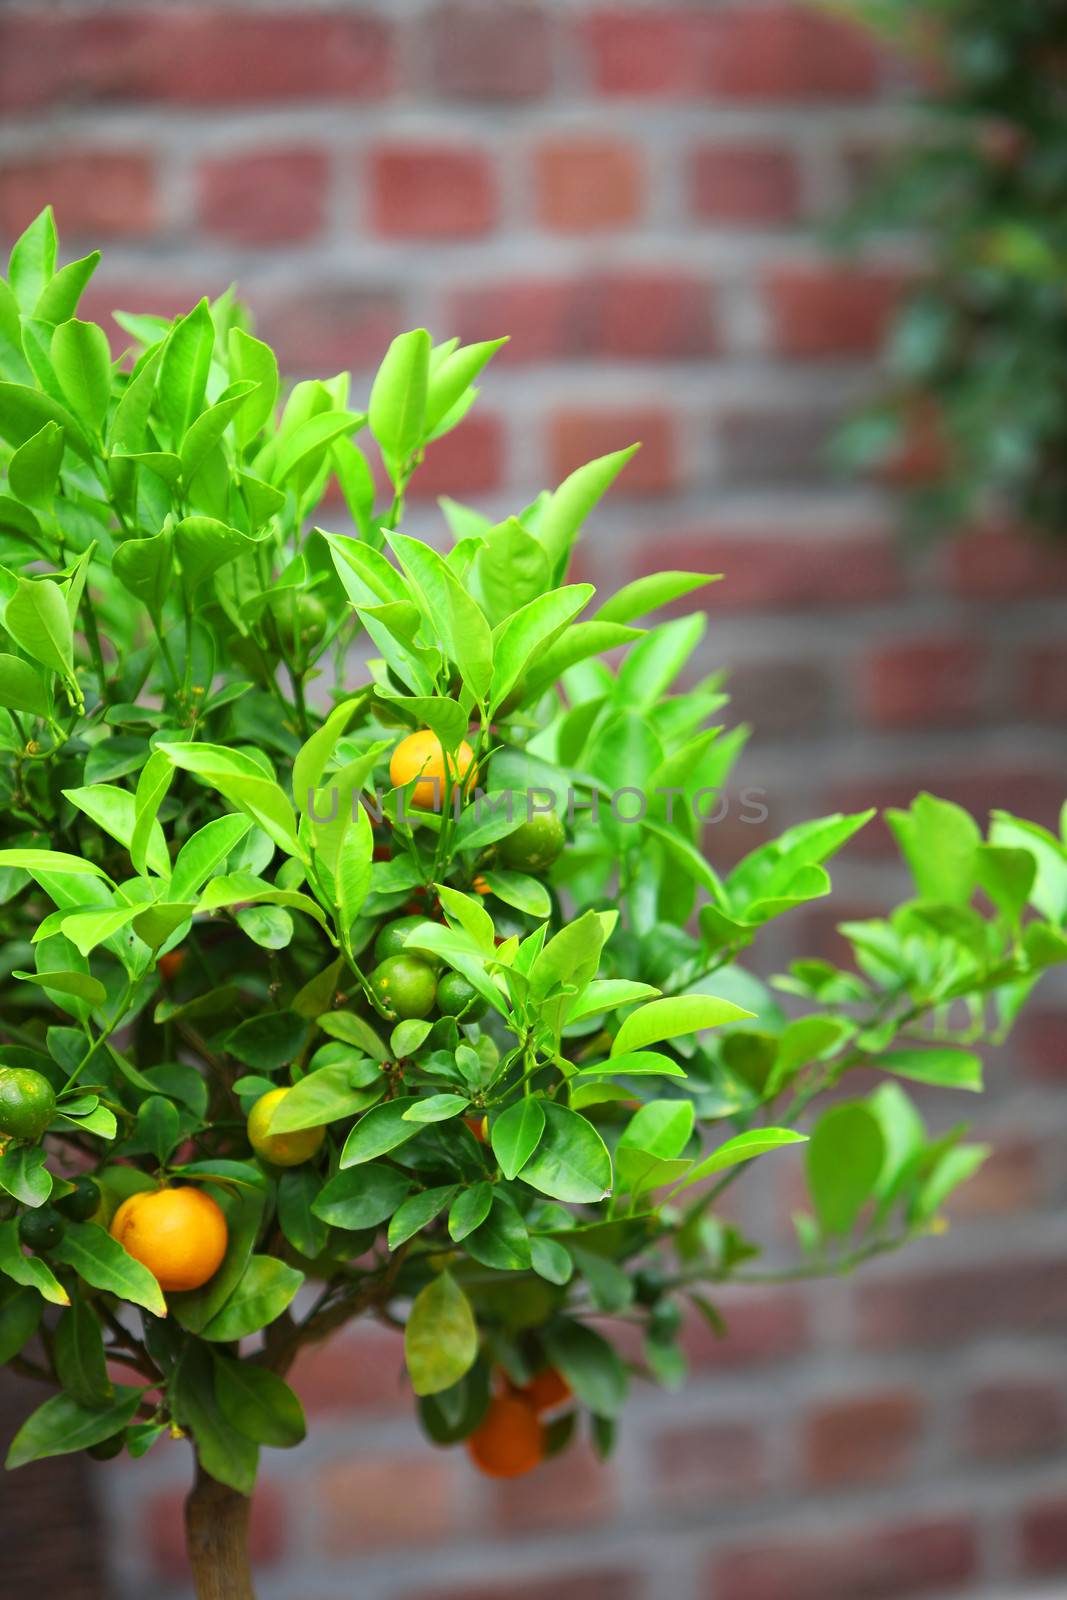 Small oranges growing on a tree by Farina6000